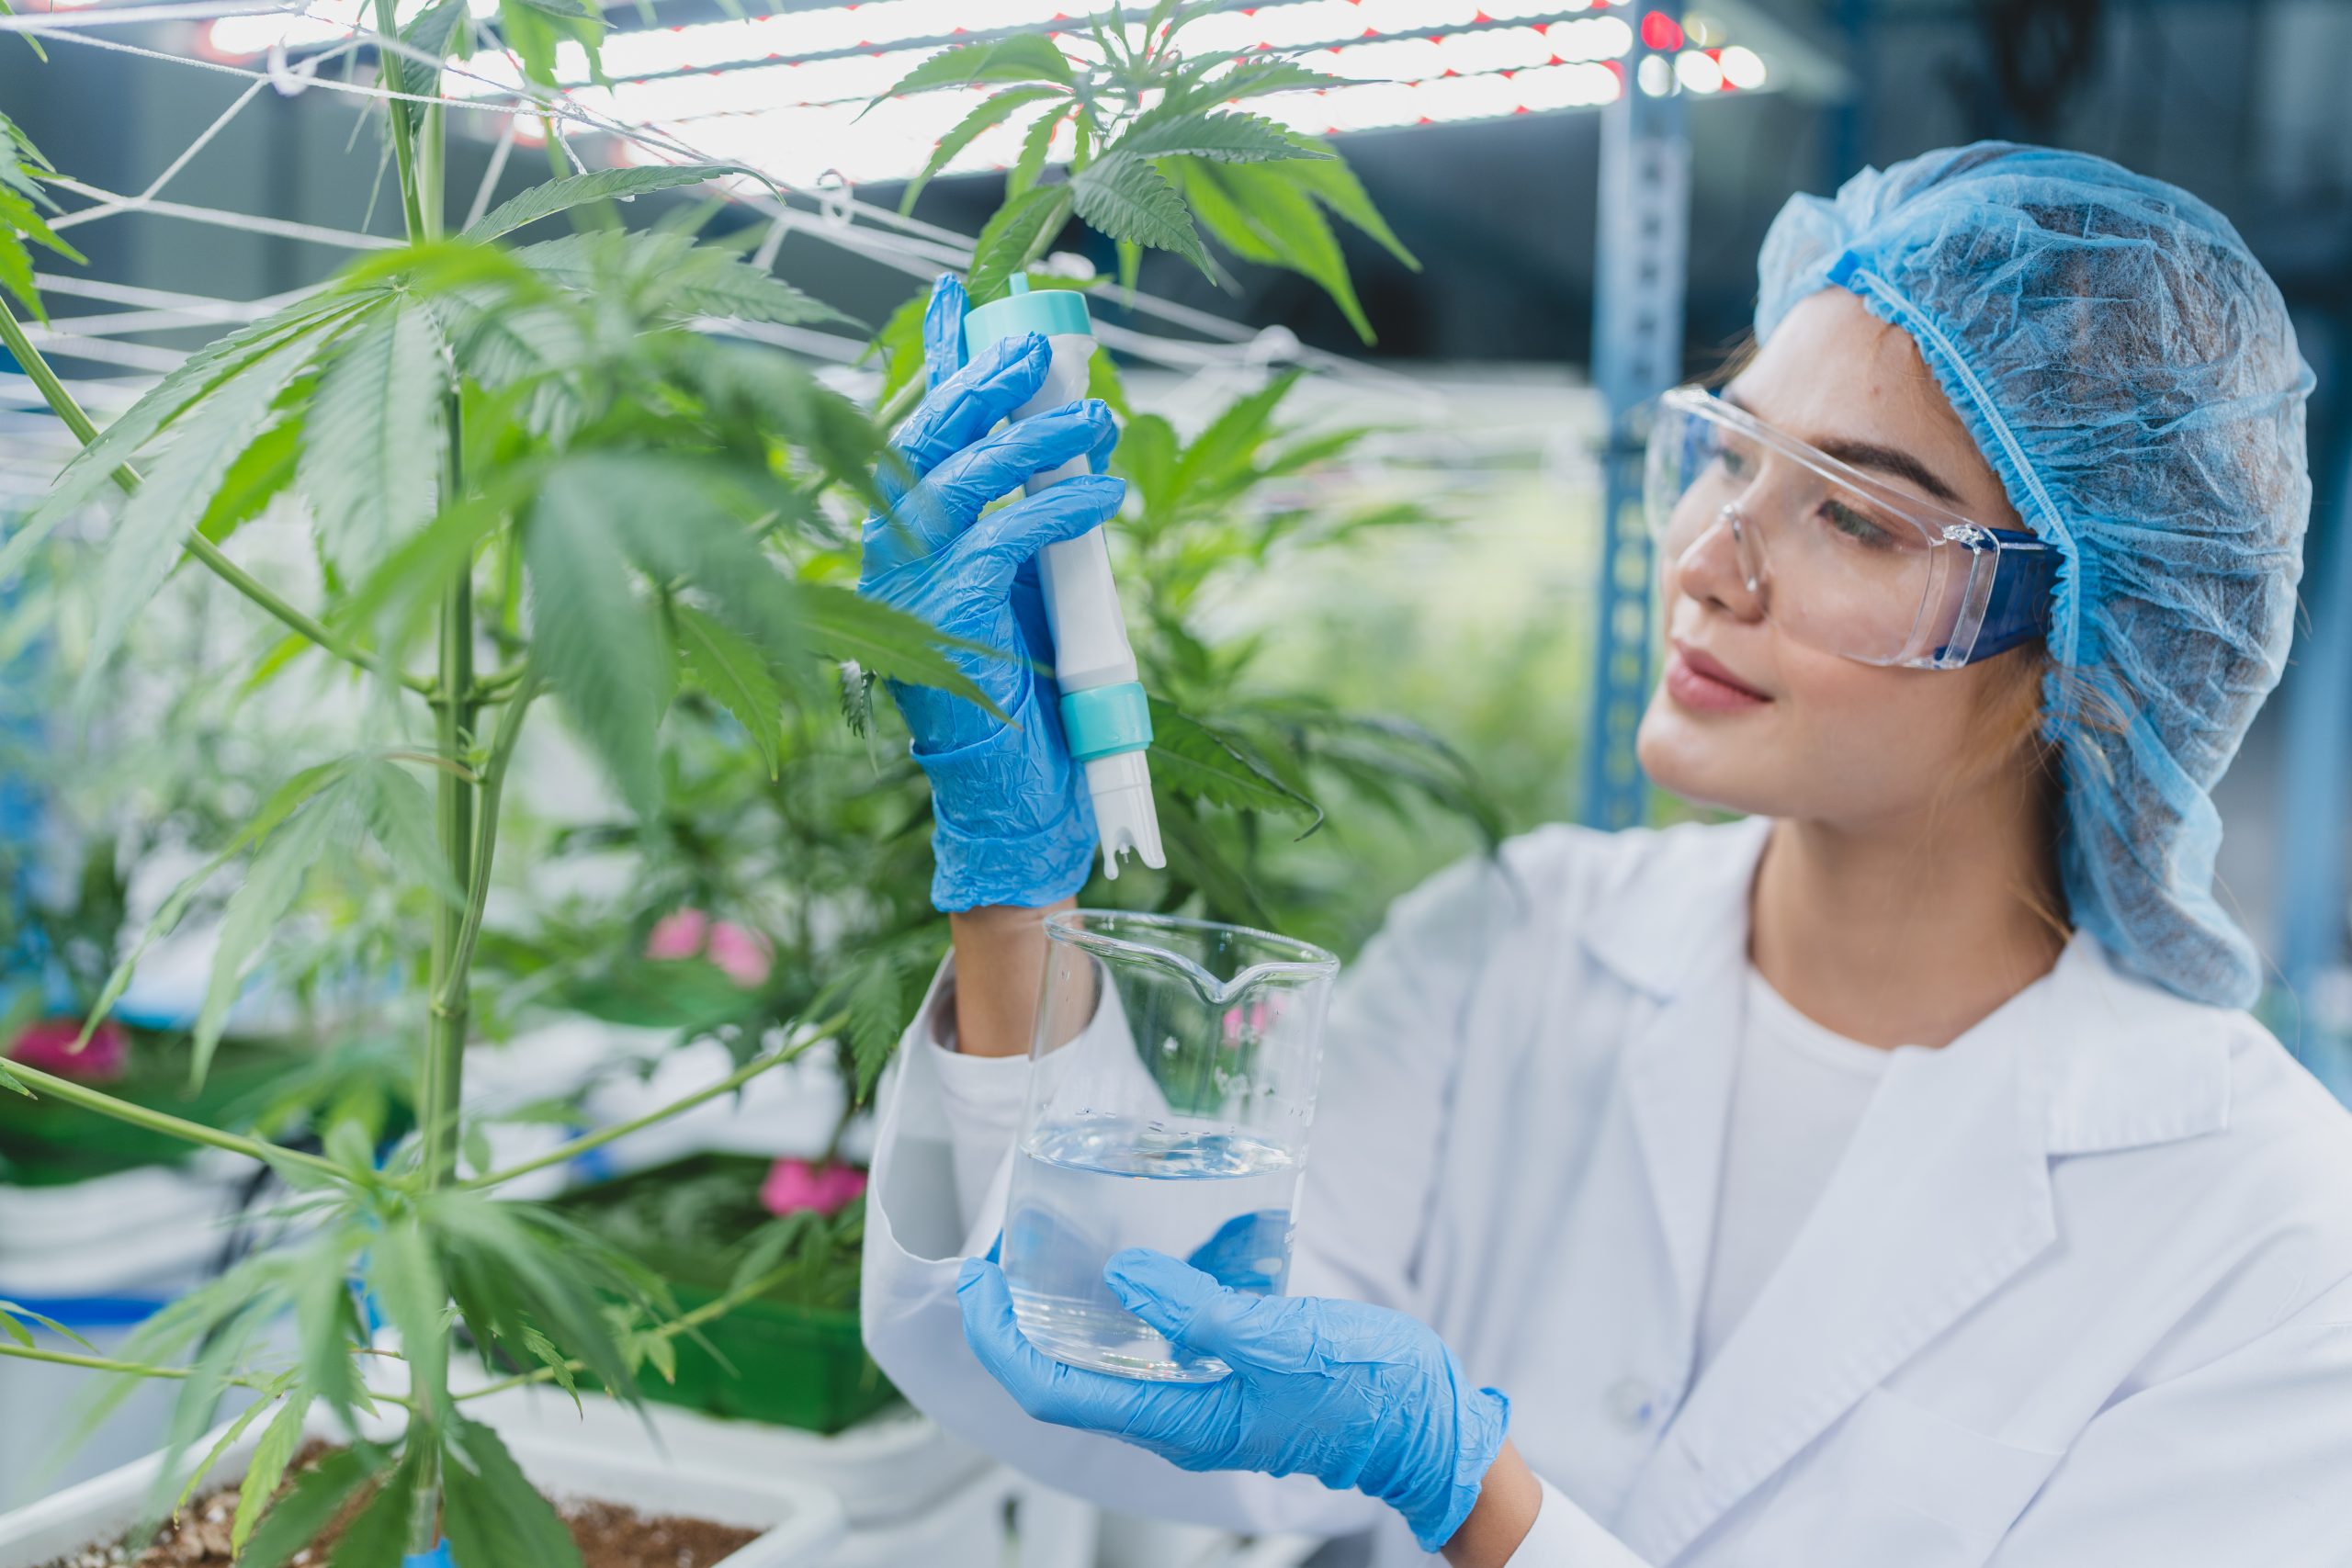 Women face gender bias in Canada’s cannabis industry